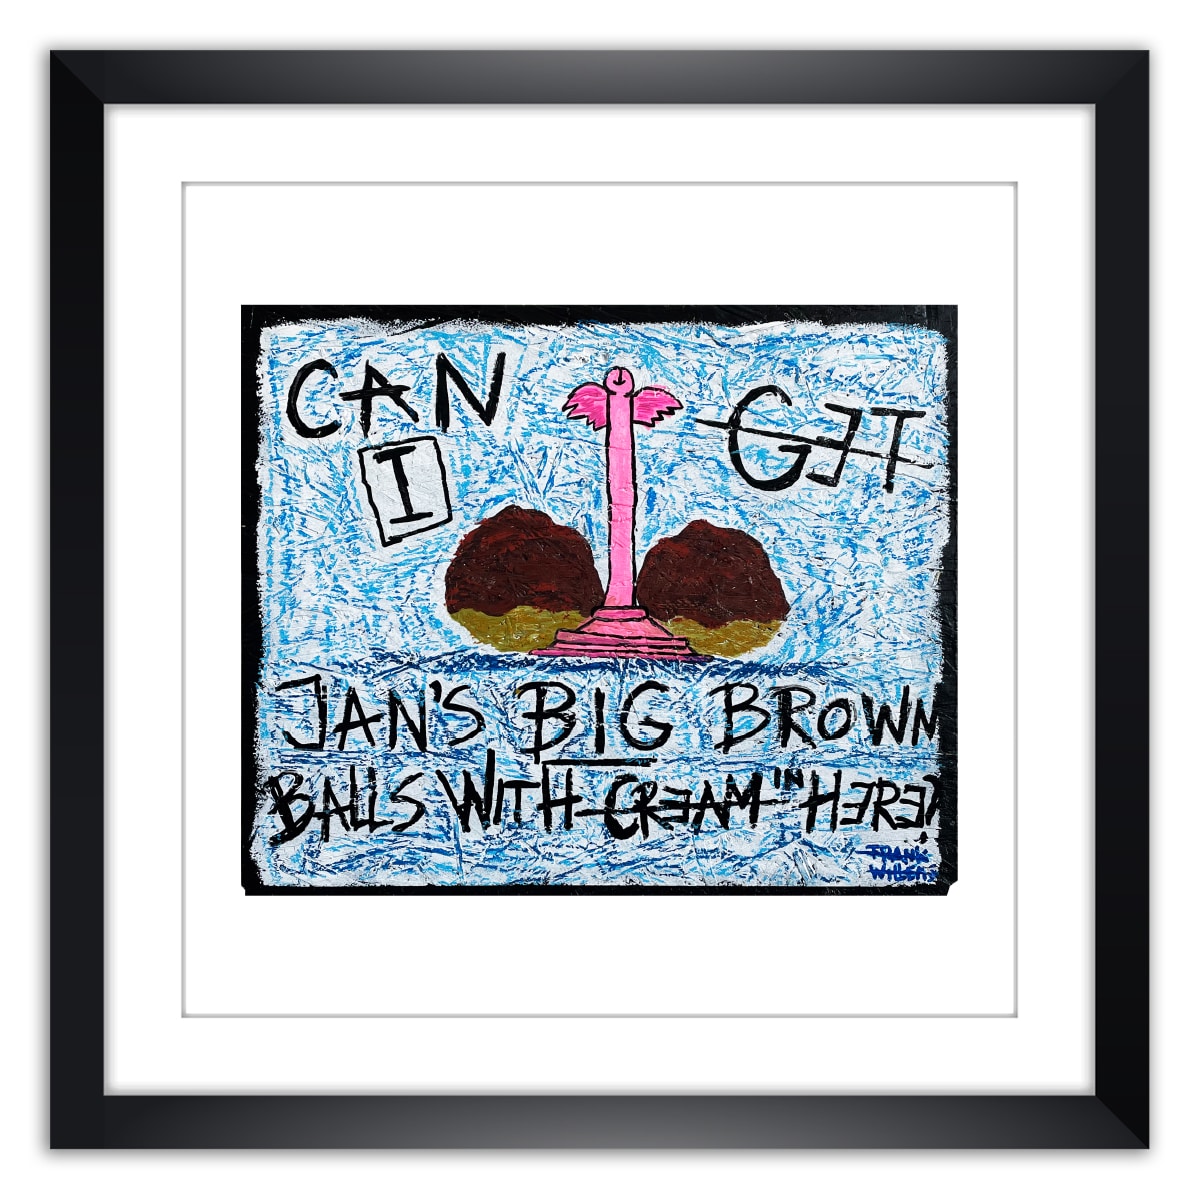 Limited prints - JAN'S BIG BROWN BALLS WITH CREAM framed - Frank Willems